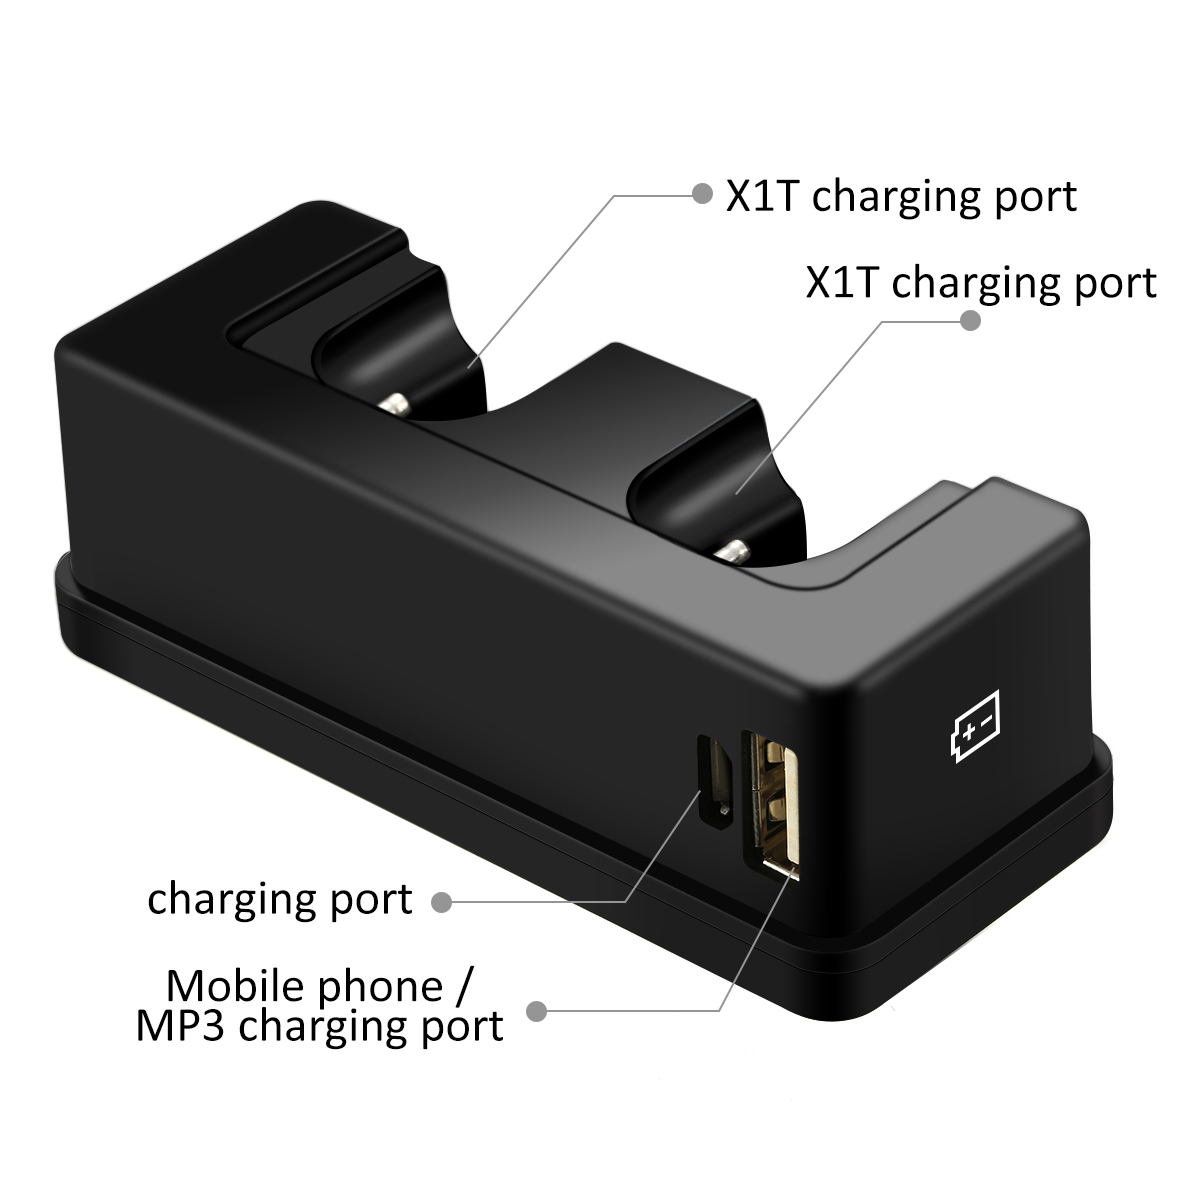 X1T-Charging-Cradle-1500mAh-Charging-Station-for-Earbuds-for-Earphone-MP3-MP4-for-Mobile-Phone-1890971-3